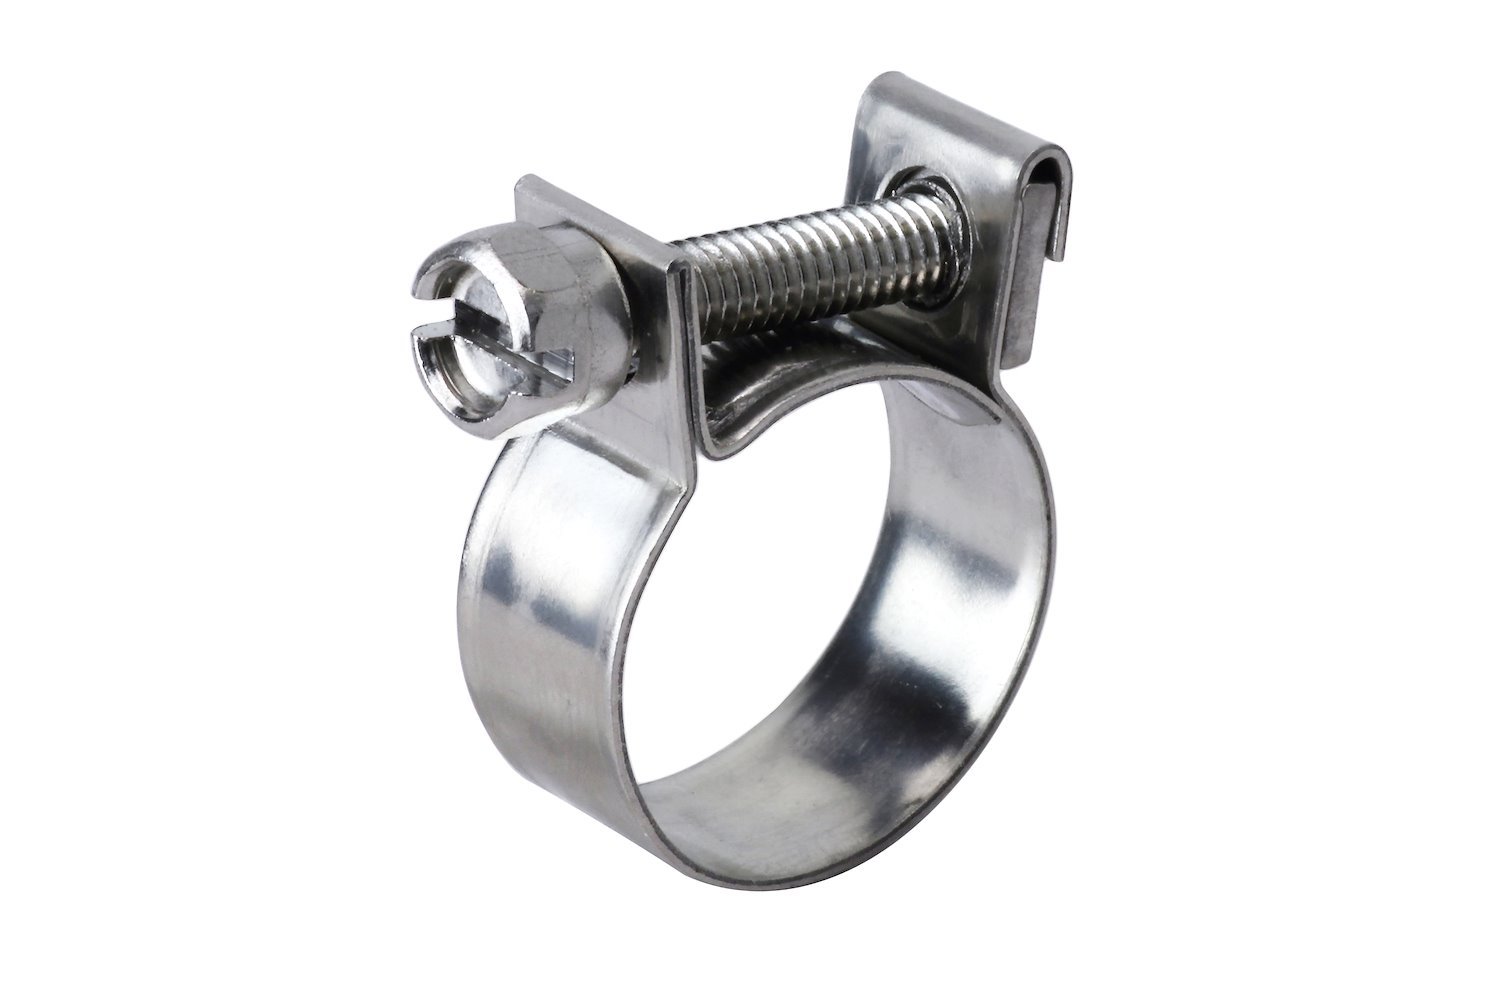 FIC-16 Fuel Injection Hose Clamp, Stainless Steel Small Hose Clamp, 5/8 in. - 45/64 in. (16 mm-18 mm)